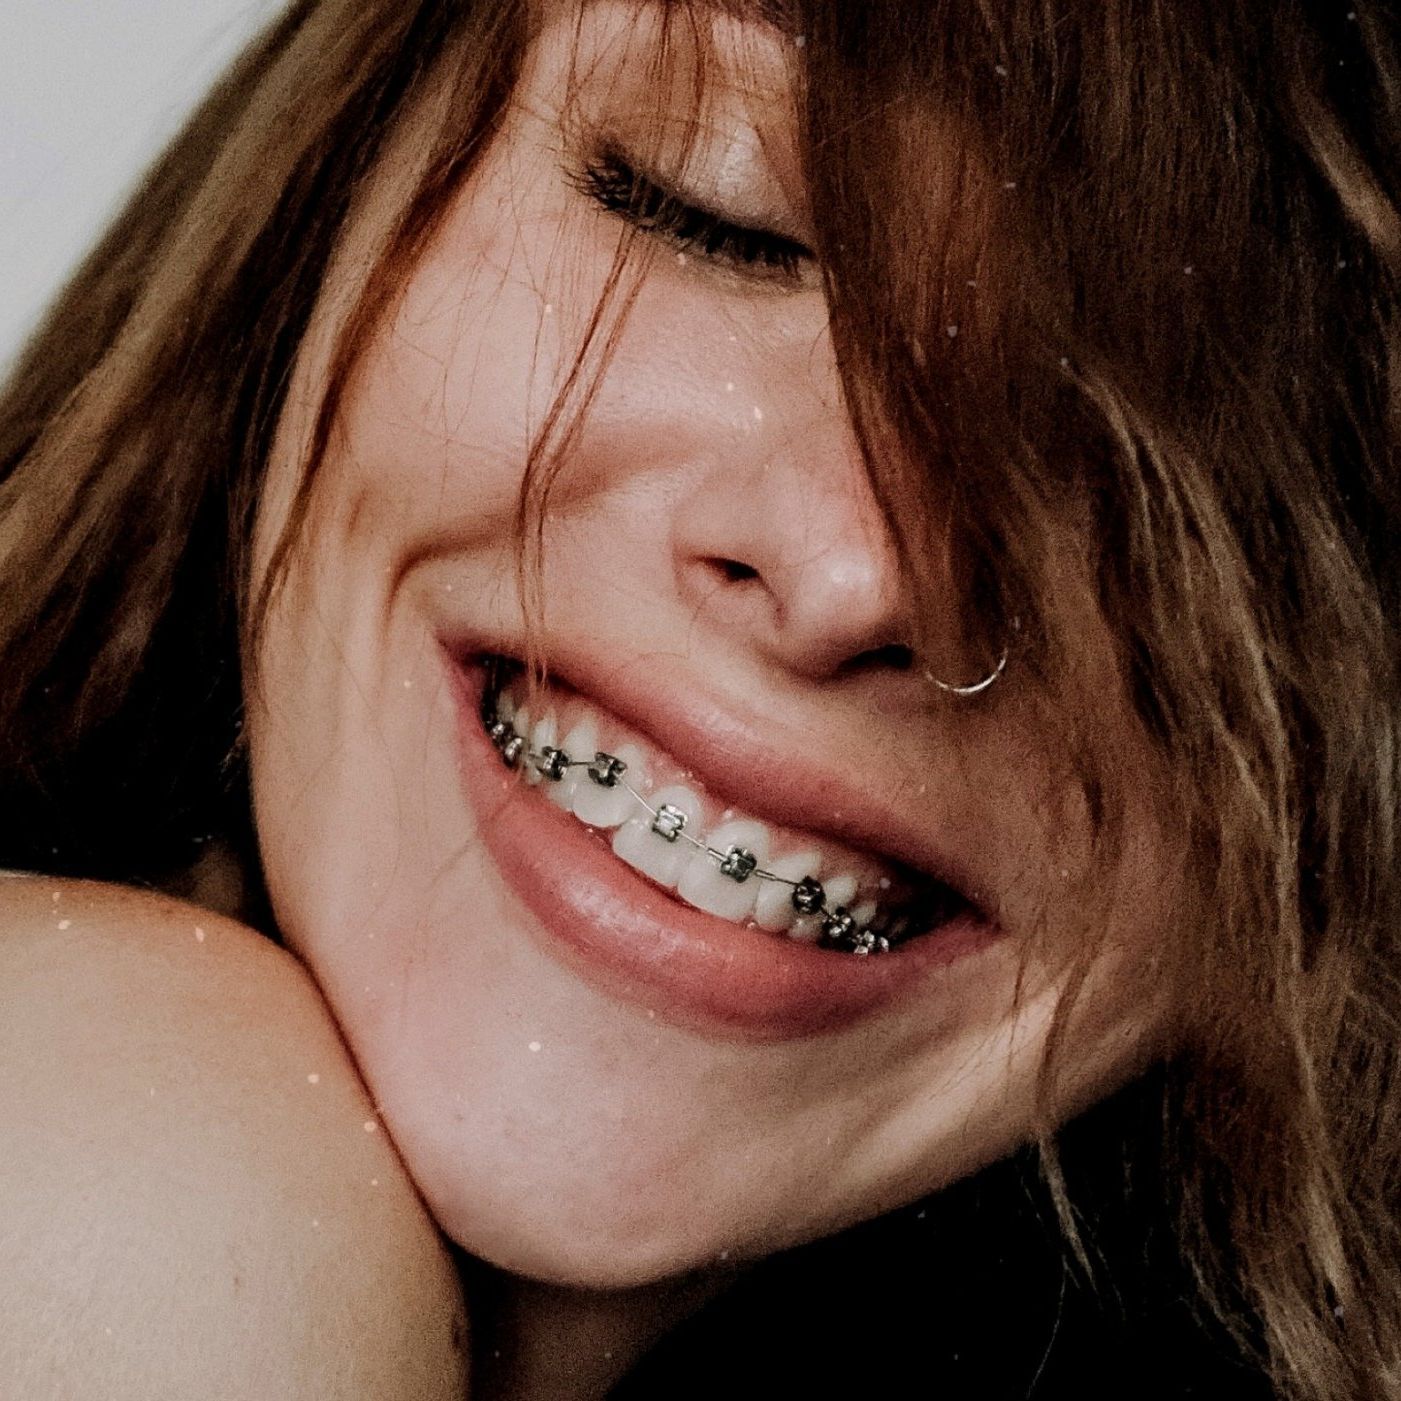 A woman with braces on her teeth is smiling with her eyes closed.